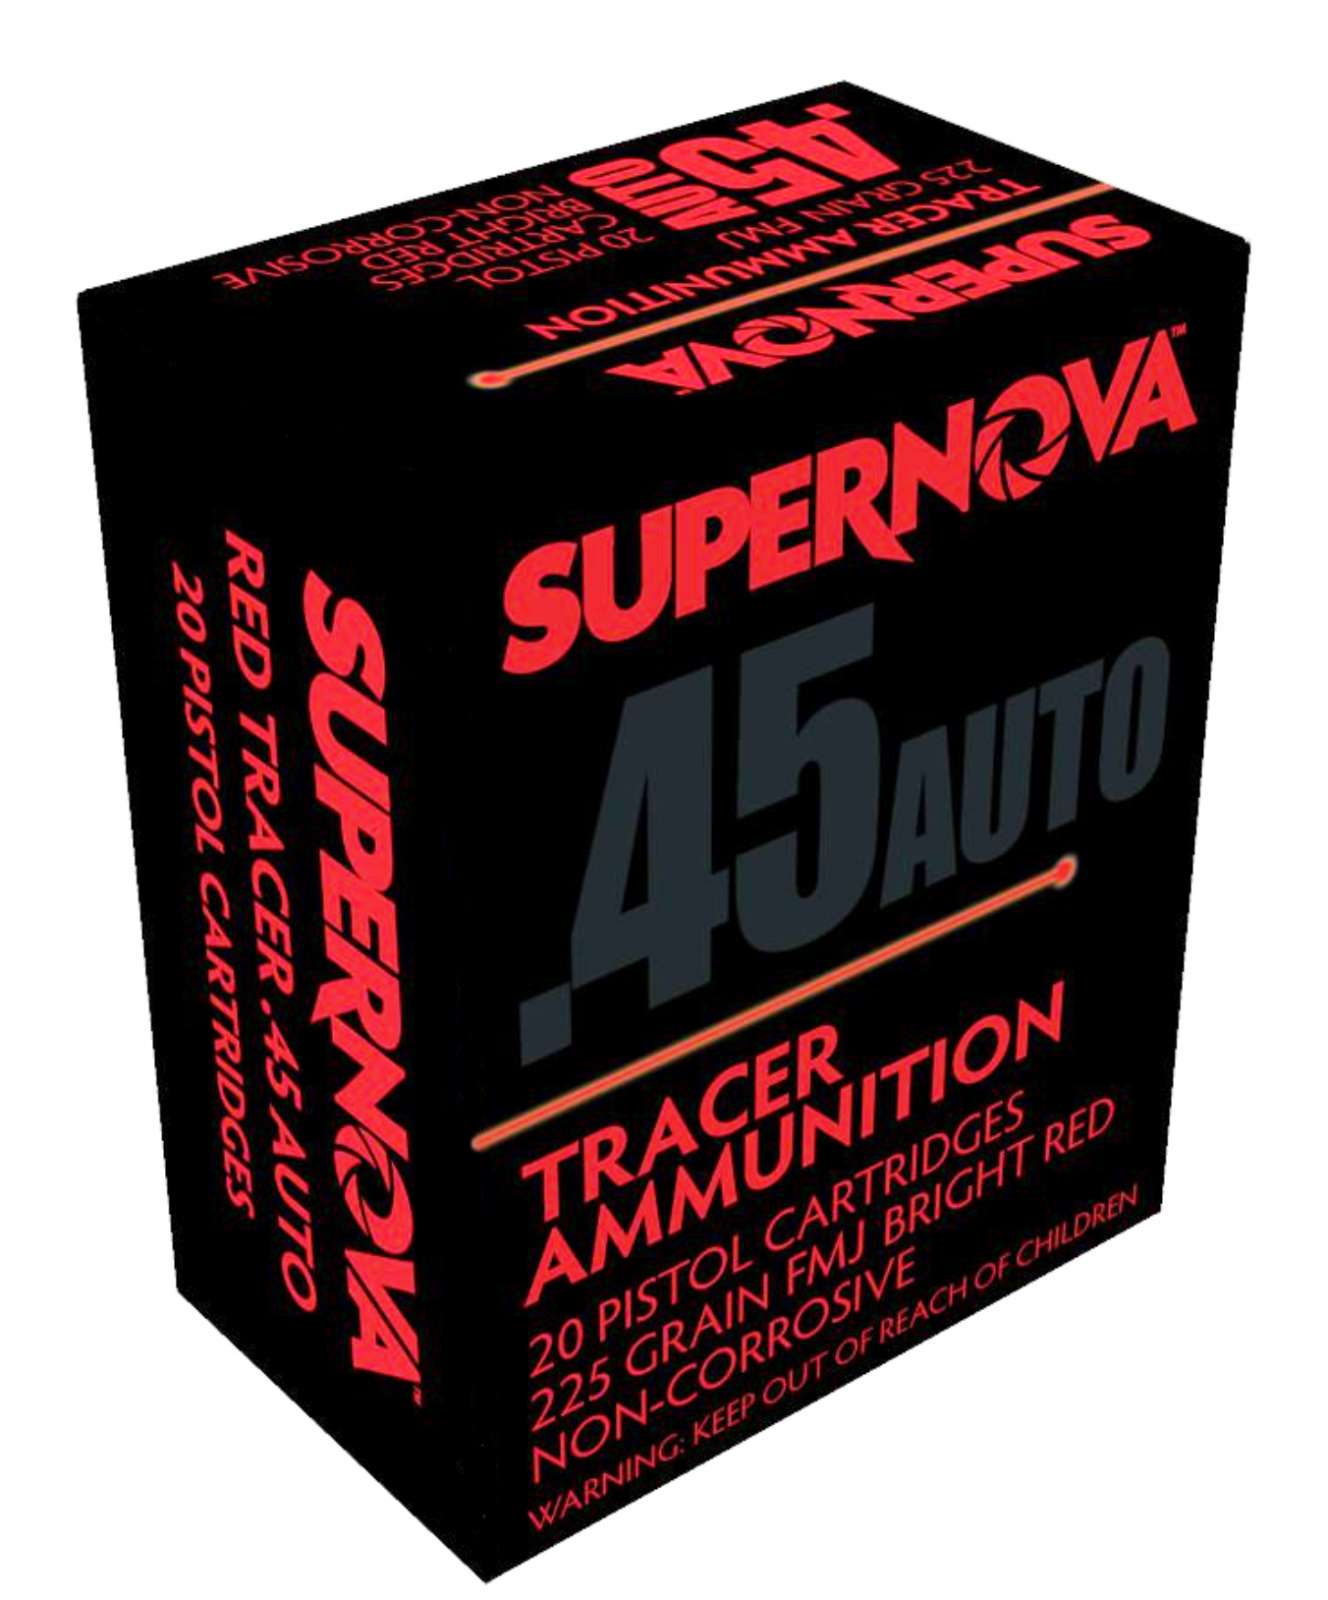 PINEY MOUNTAIN AMMUNITION AMO 45 AUTO 225GR FMJ RED TRACER 20RD ( 10 ...